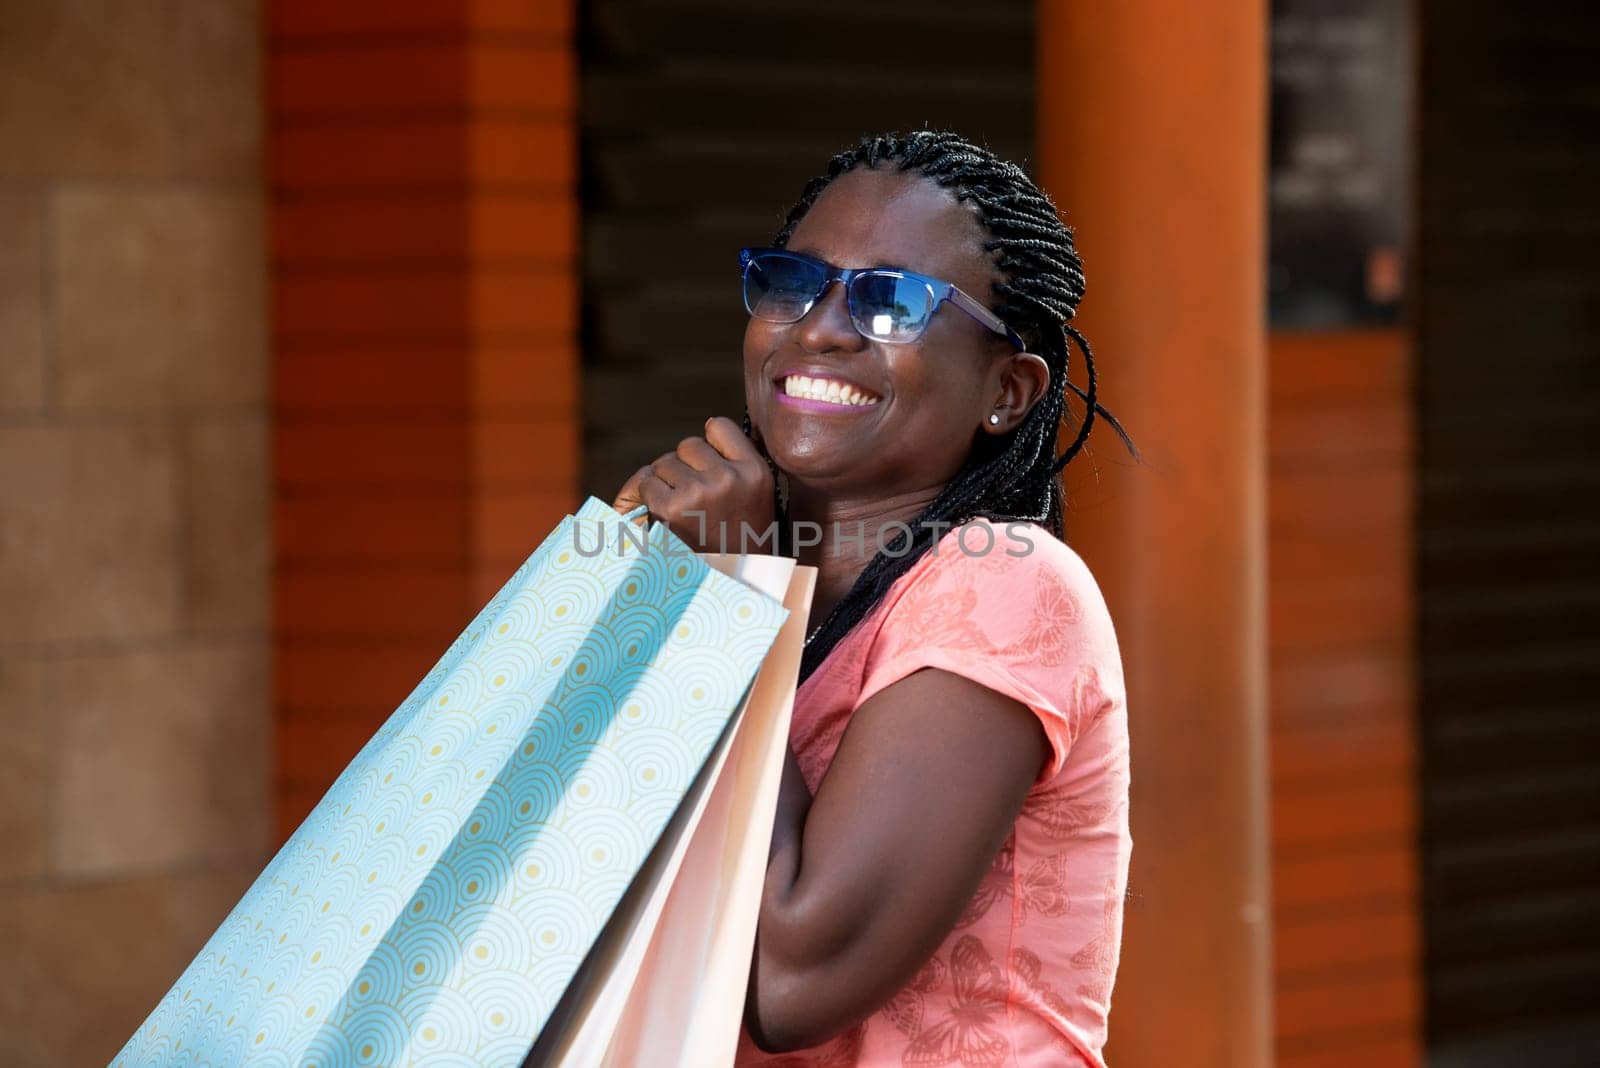 young woman standing outdoors in sunglasses laughing with shopping bags in hand.